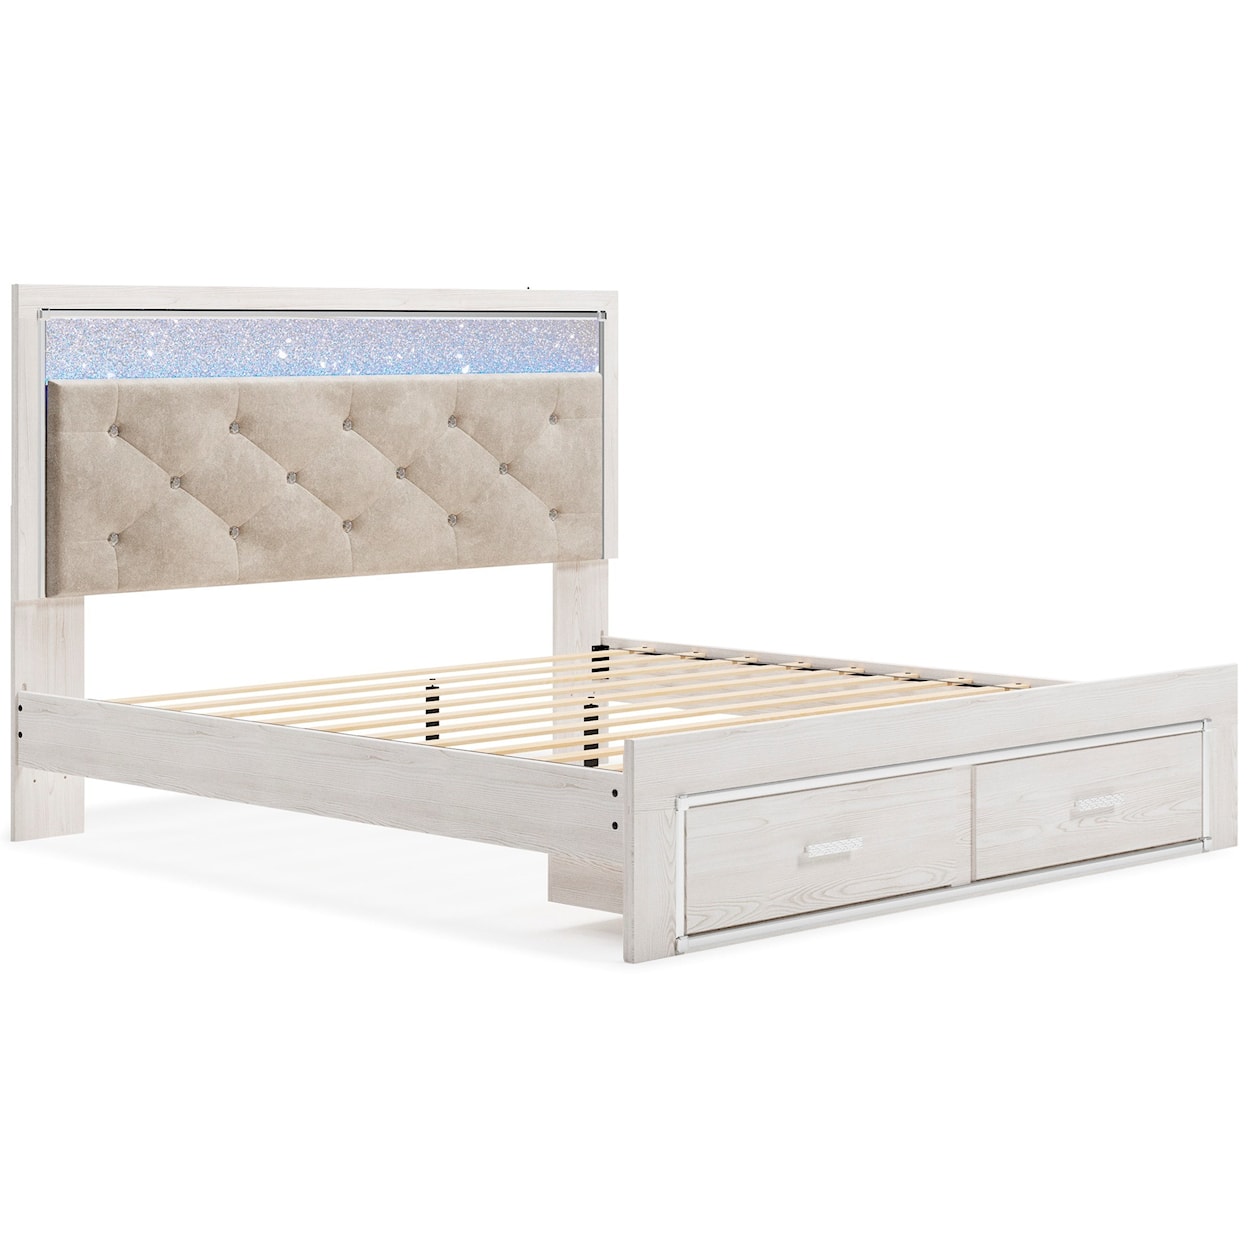 Signature Design by Ashley Furniture Altyra King Storage Bed with Upholstered Headboard